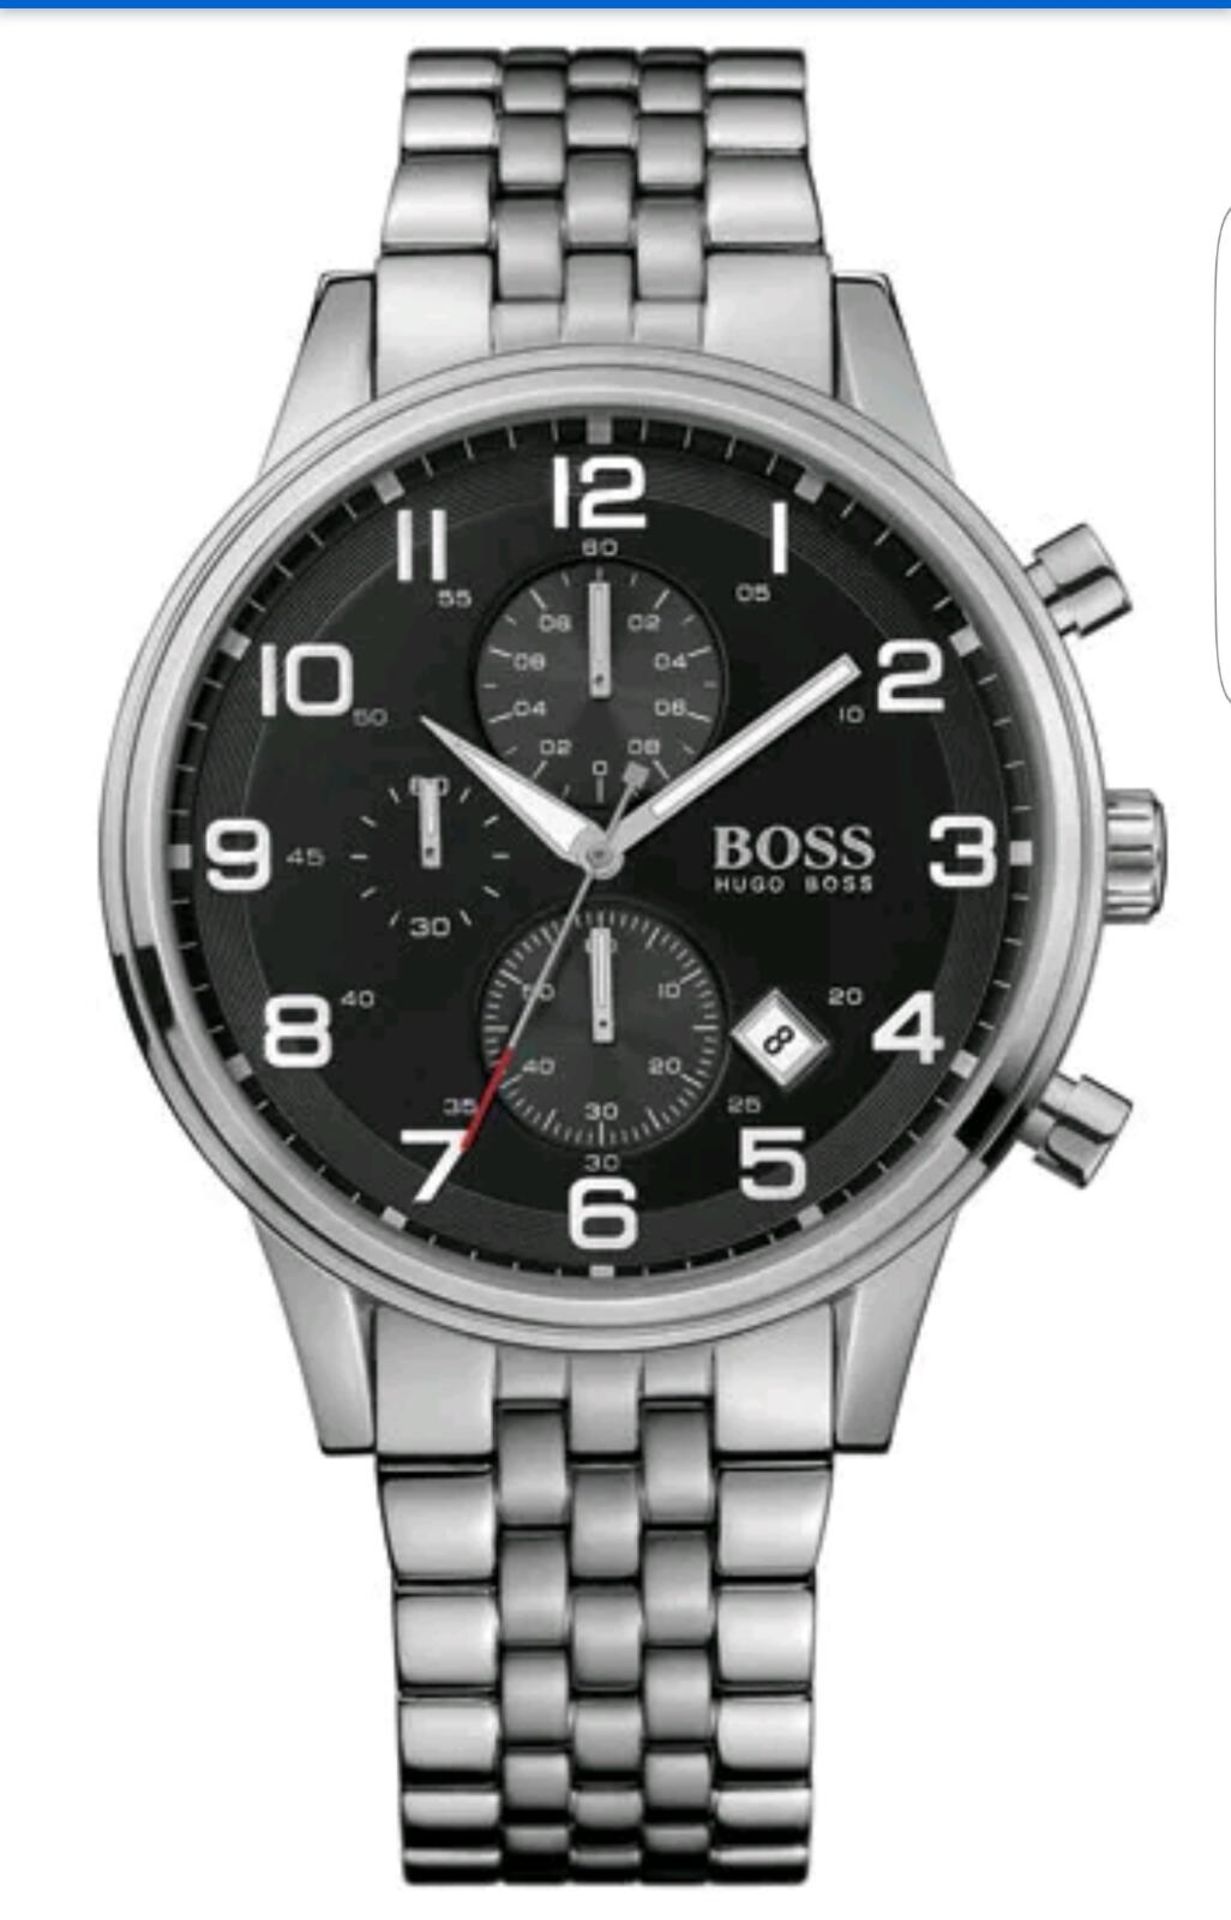 BRAND NEW HUGO BOSS 1512446, COMPLETE WITH ORIGINAL BOX AND MANUAL